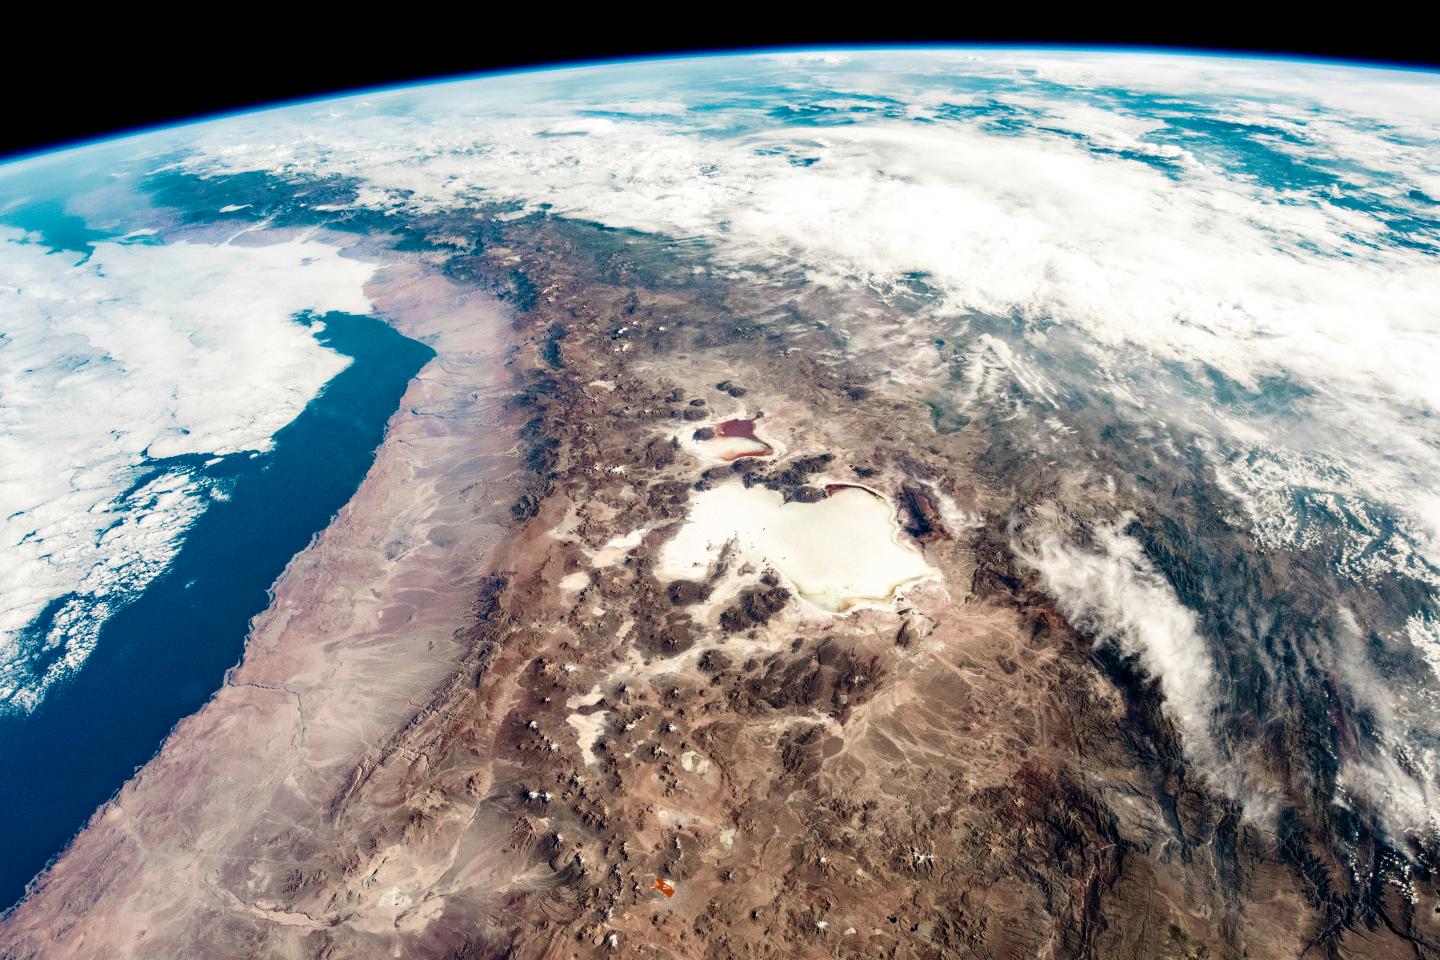 Andes Seen from Space